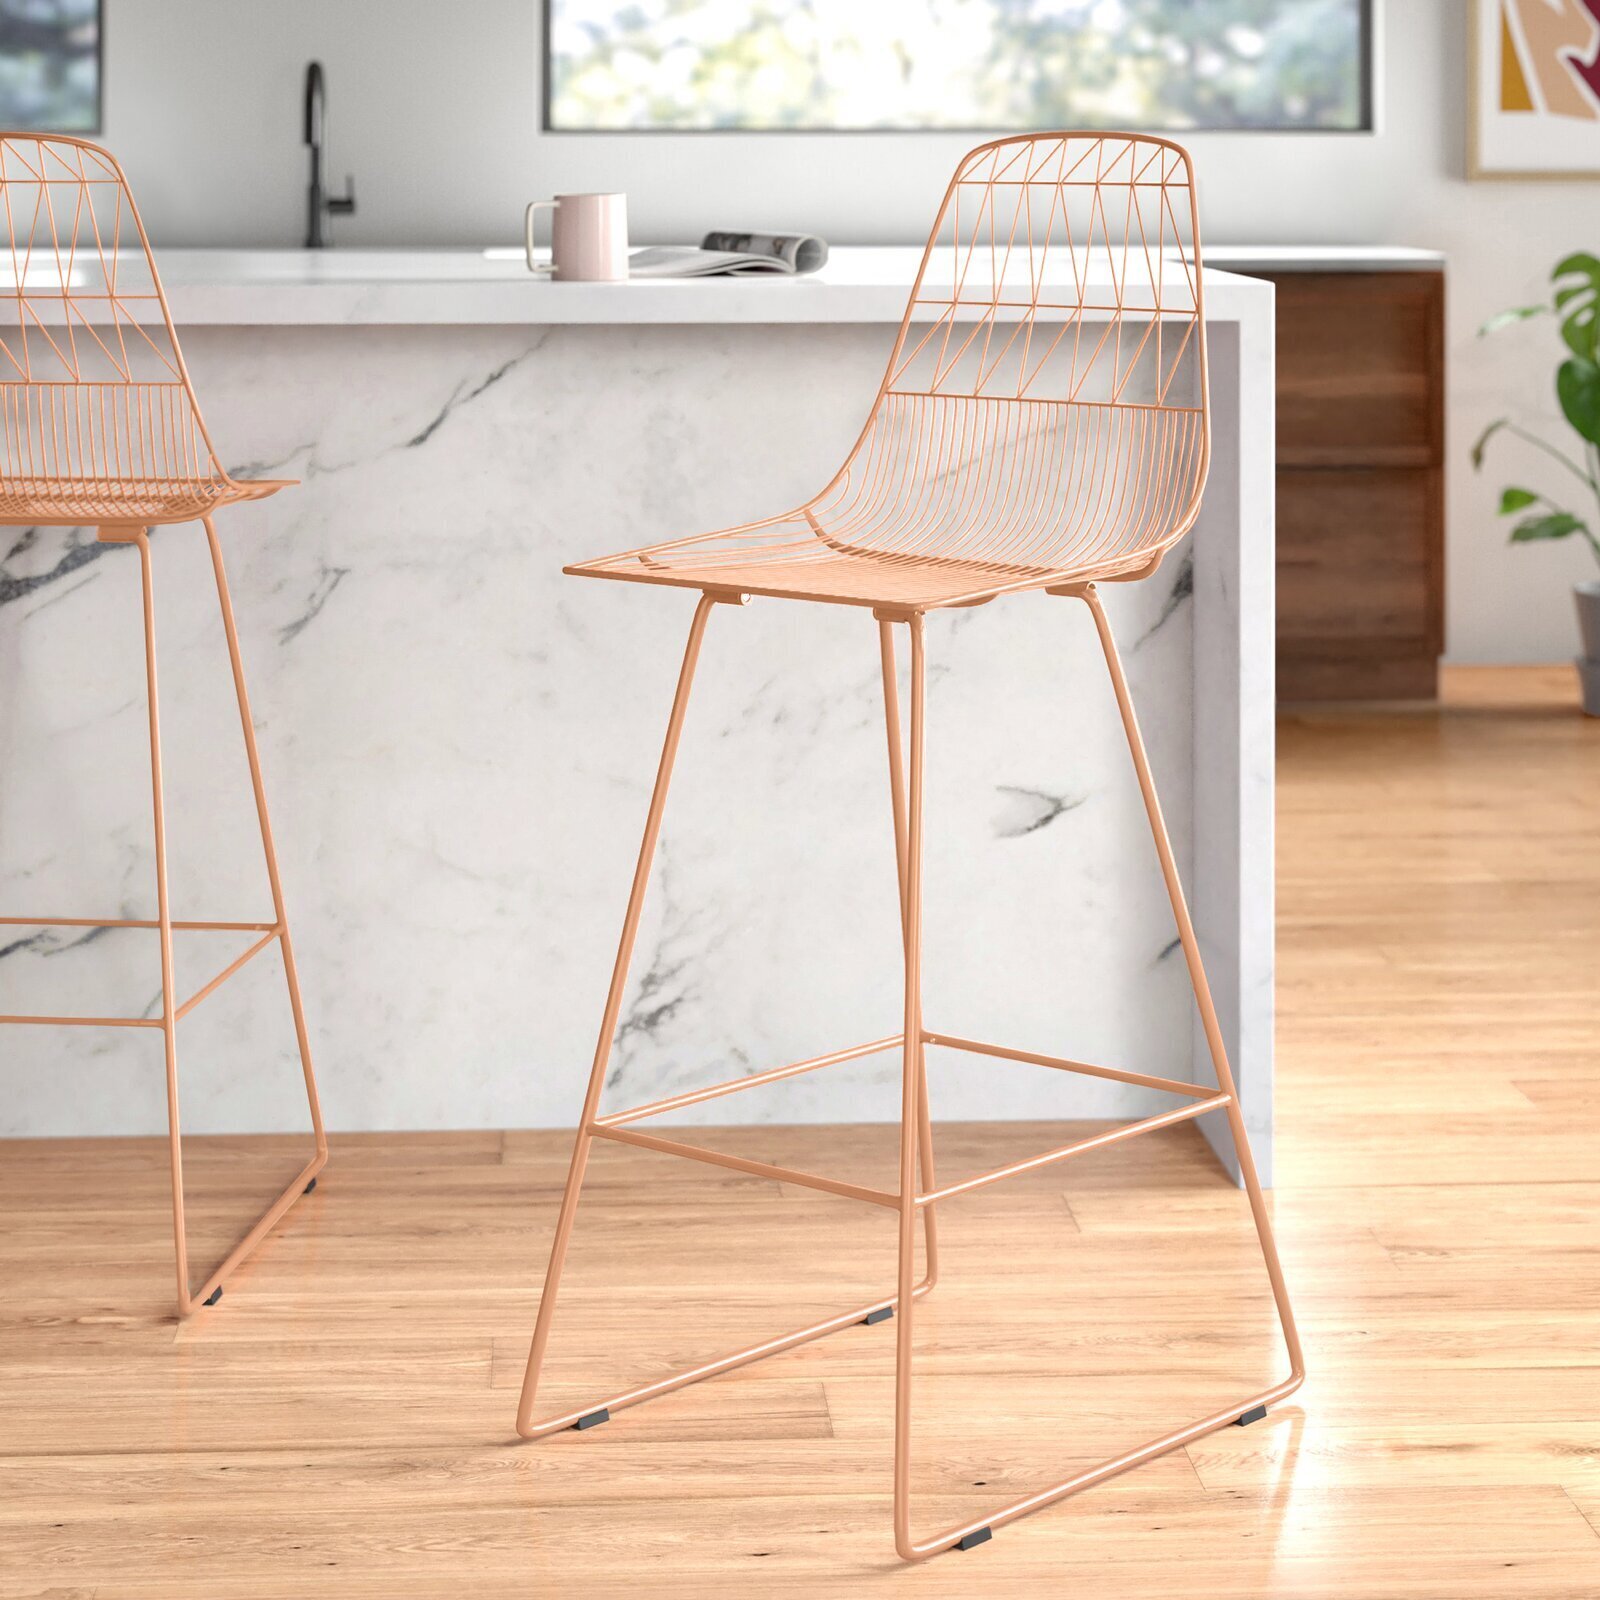 Retro Inspired Copper Kitchen Stool and Bar Stool